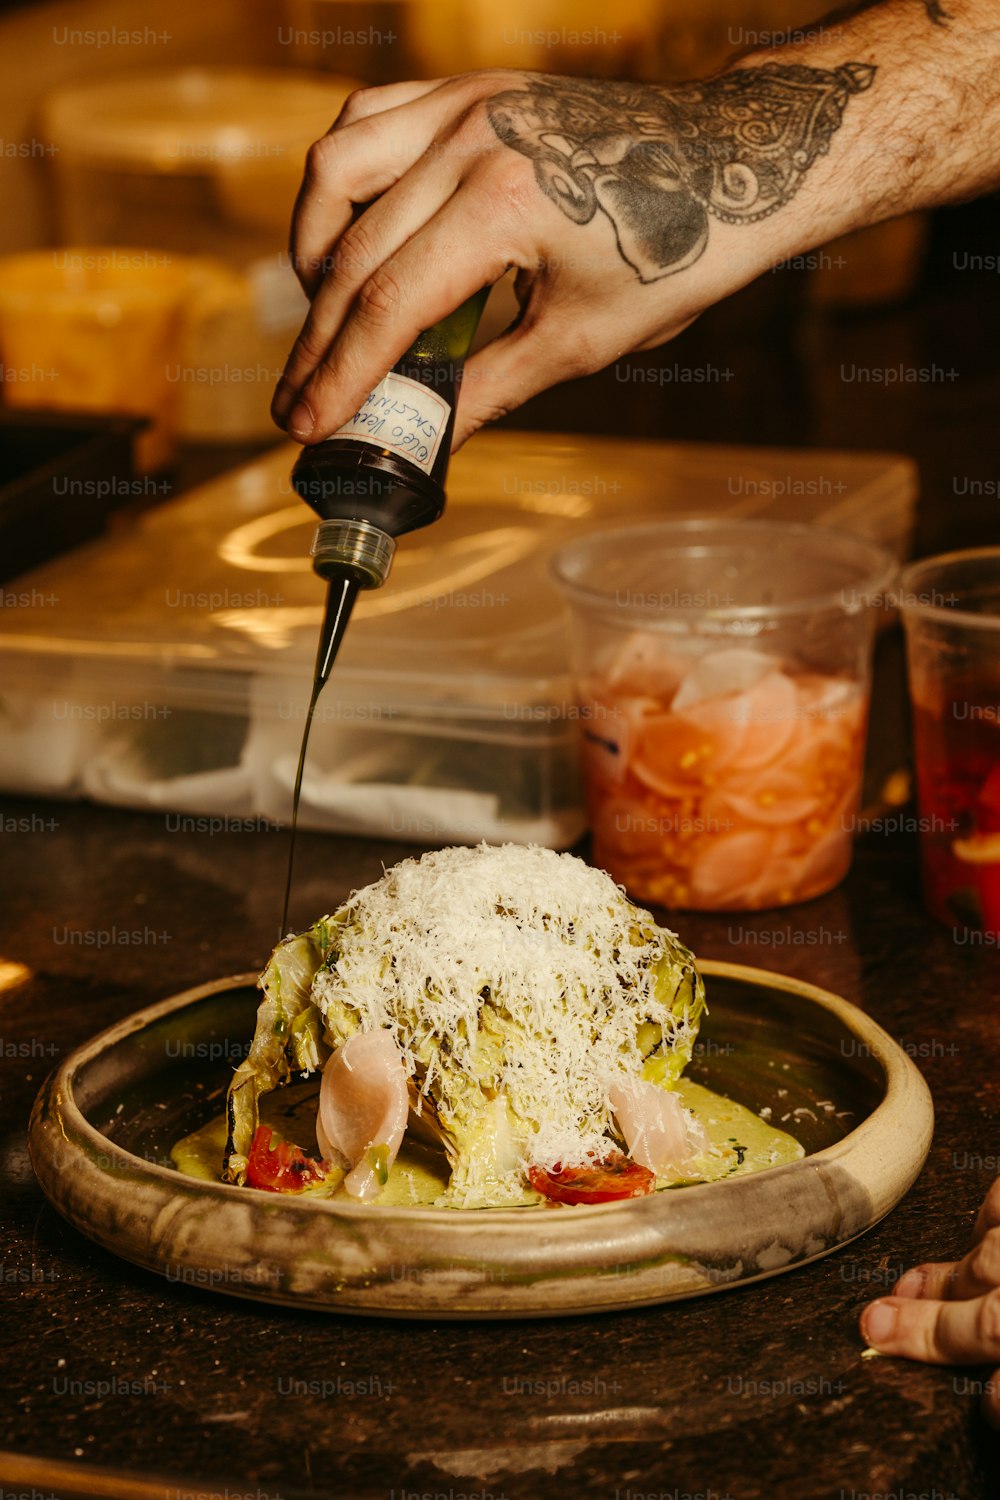 a person pouring sauce on a dish of food